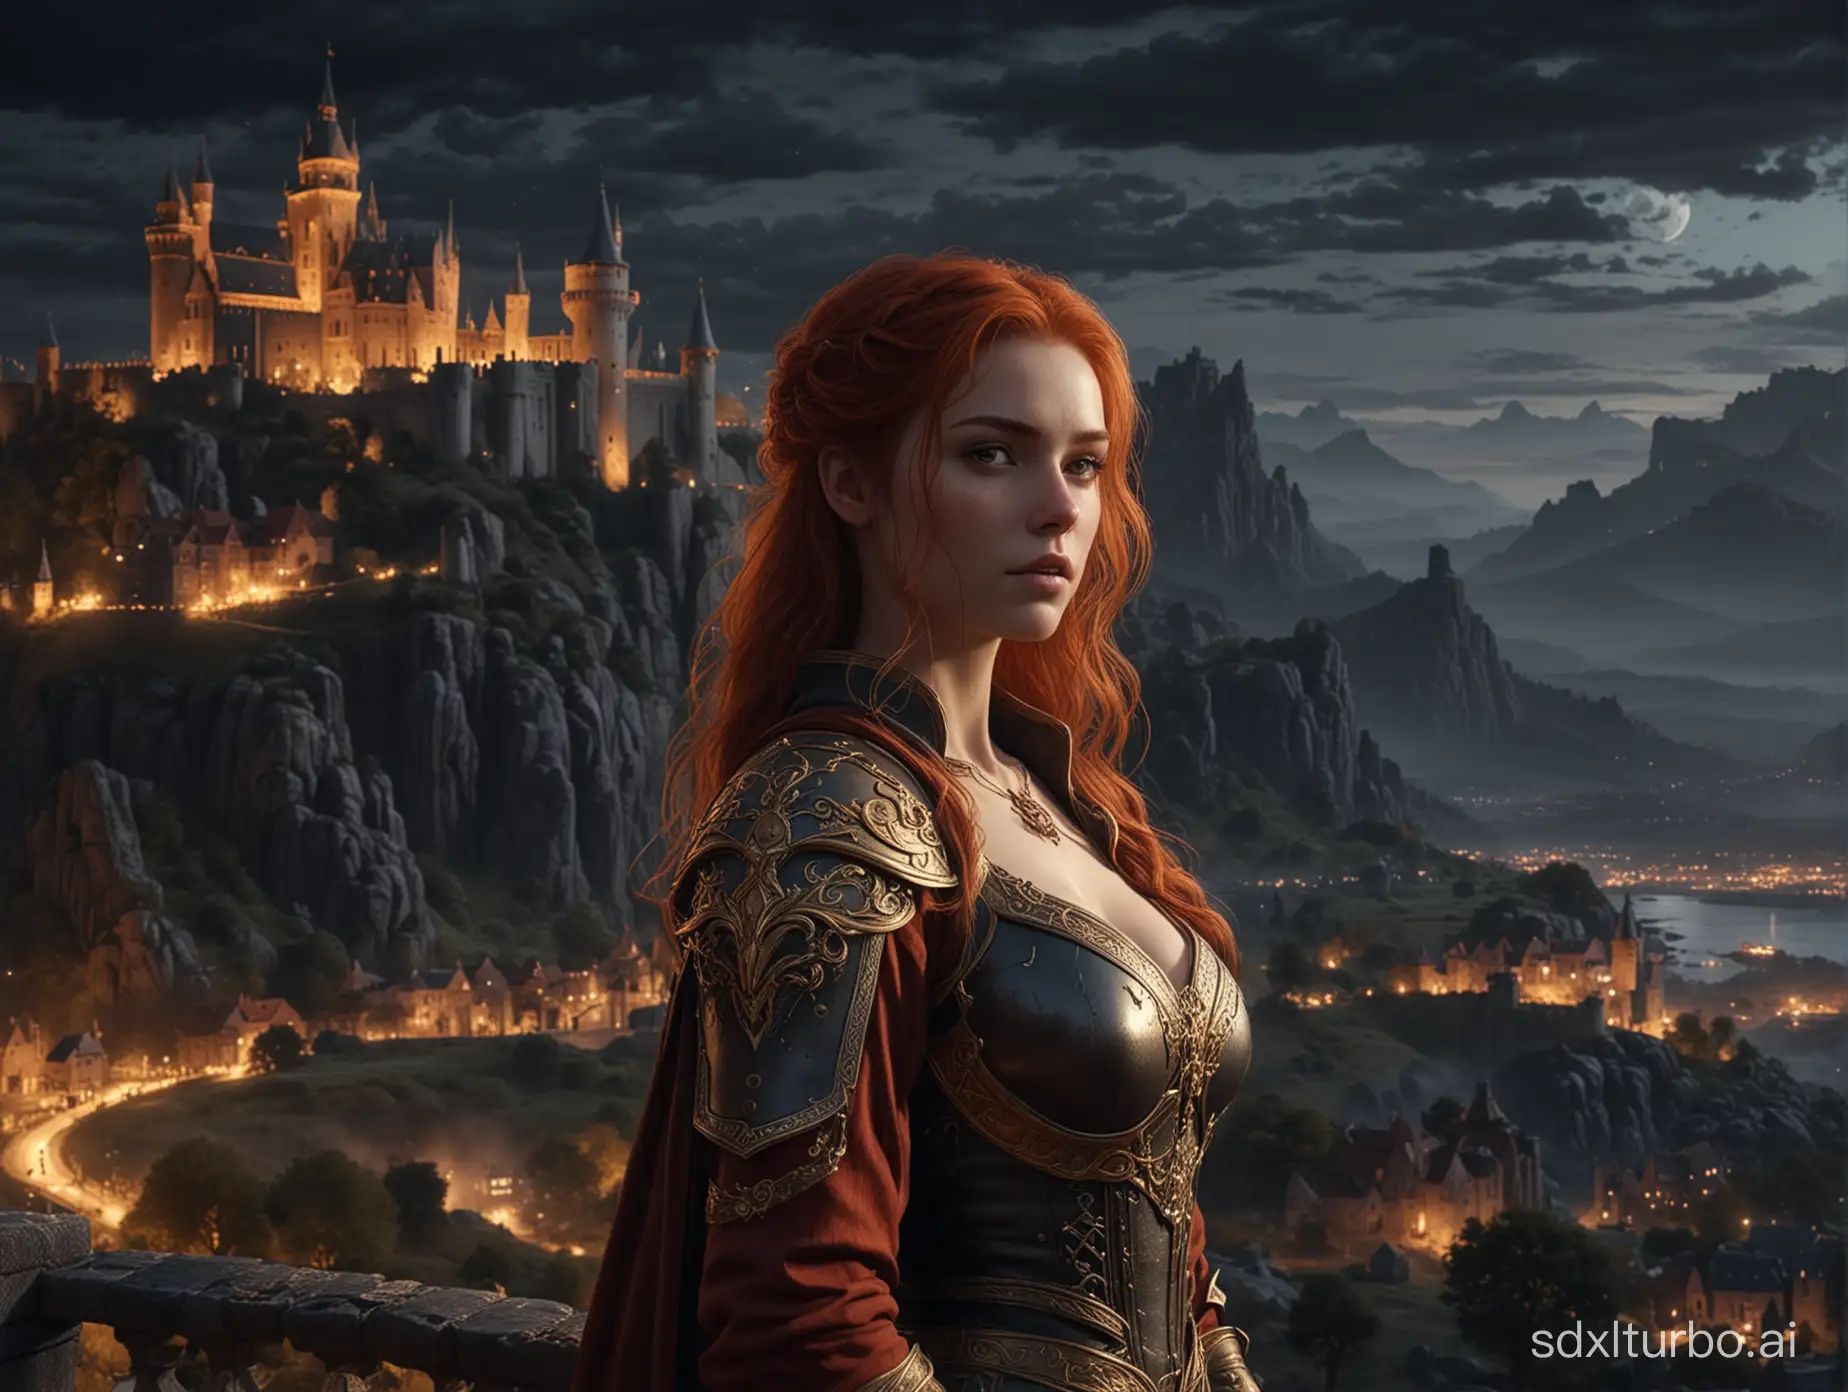 Elden ring landscape, castle, epic night, 8k, realistic fantasy, female angle character, red hair and gold glotess, in the Middle front of the landscape